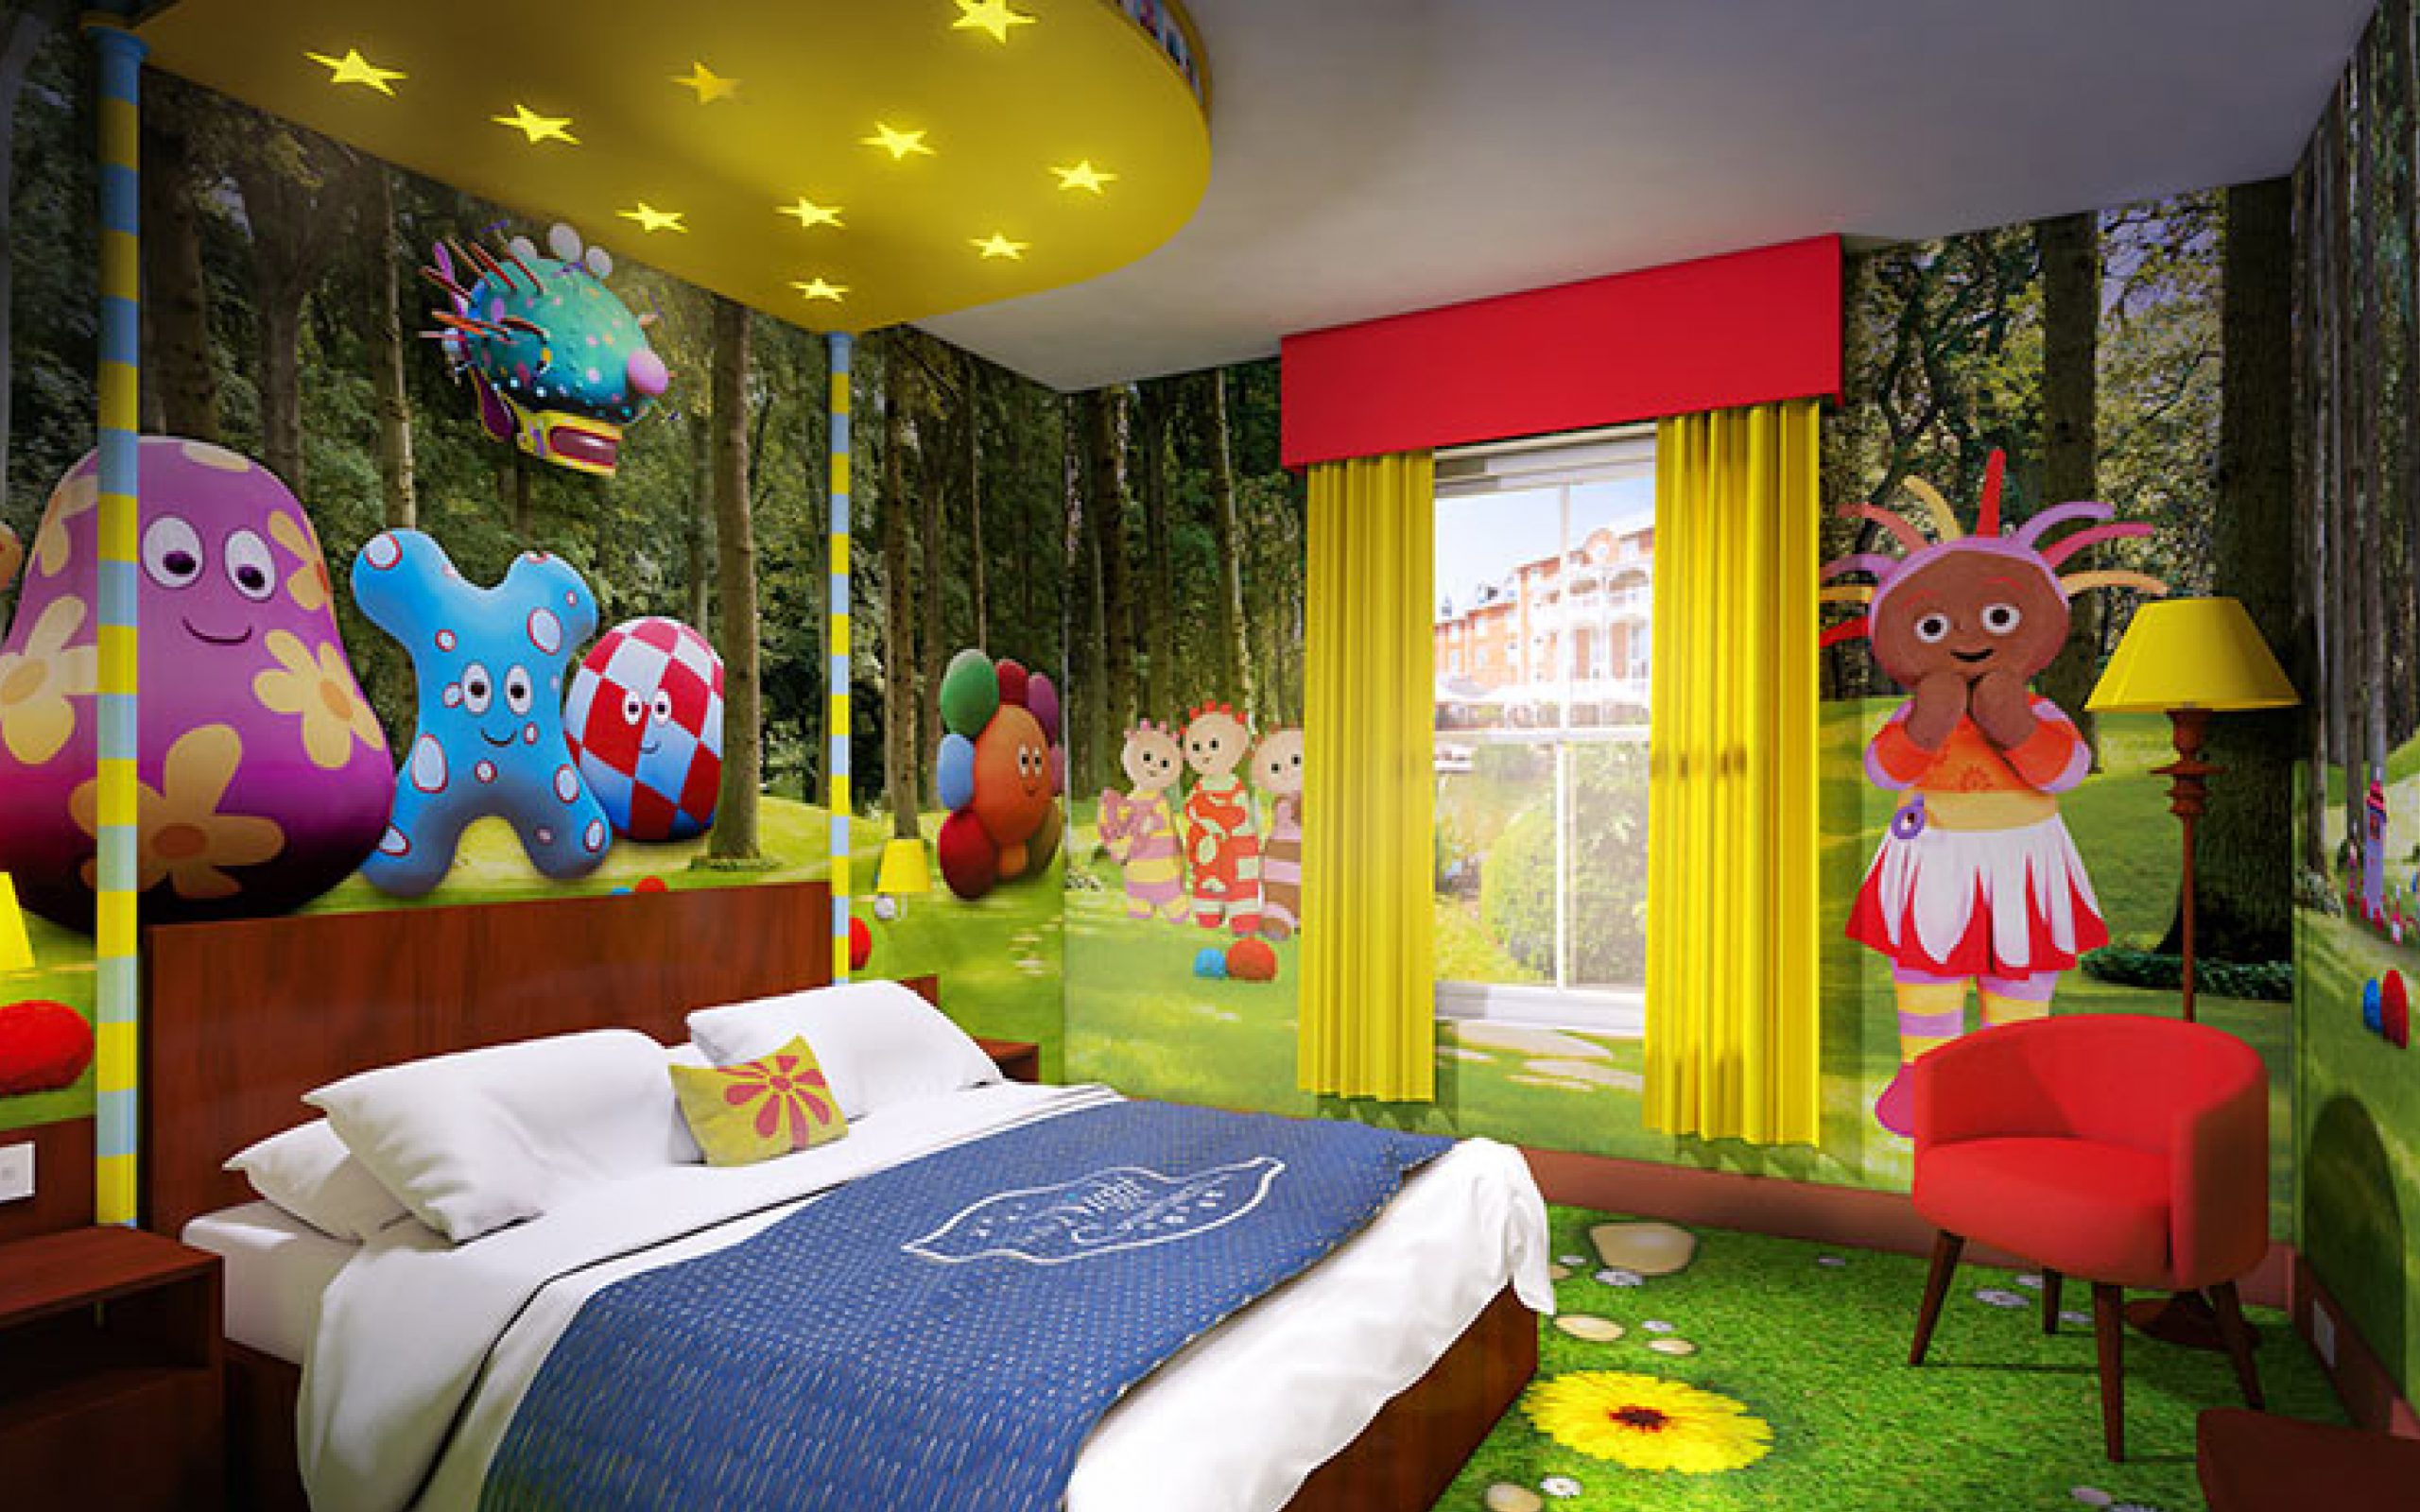 Inside an in the night garden themed hotel room